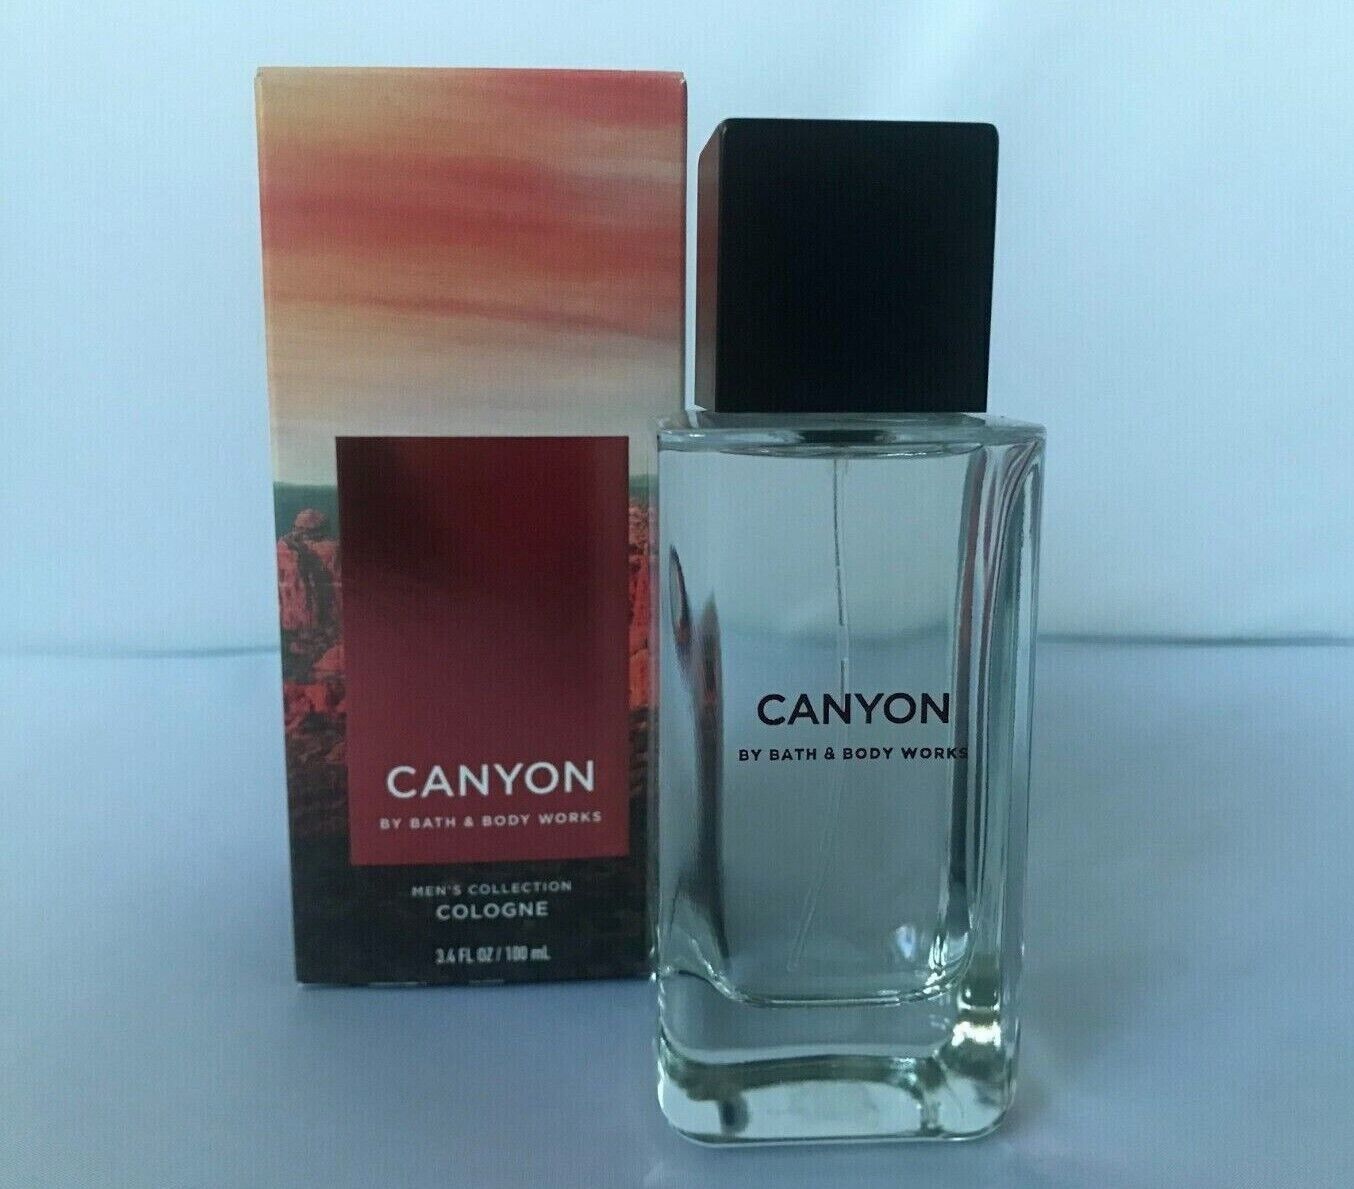 Bath and& Body Works CANYON Men's Collection Cologne 3.4 fl oz BRAND NEW |  eBay